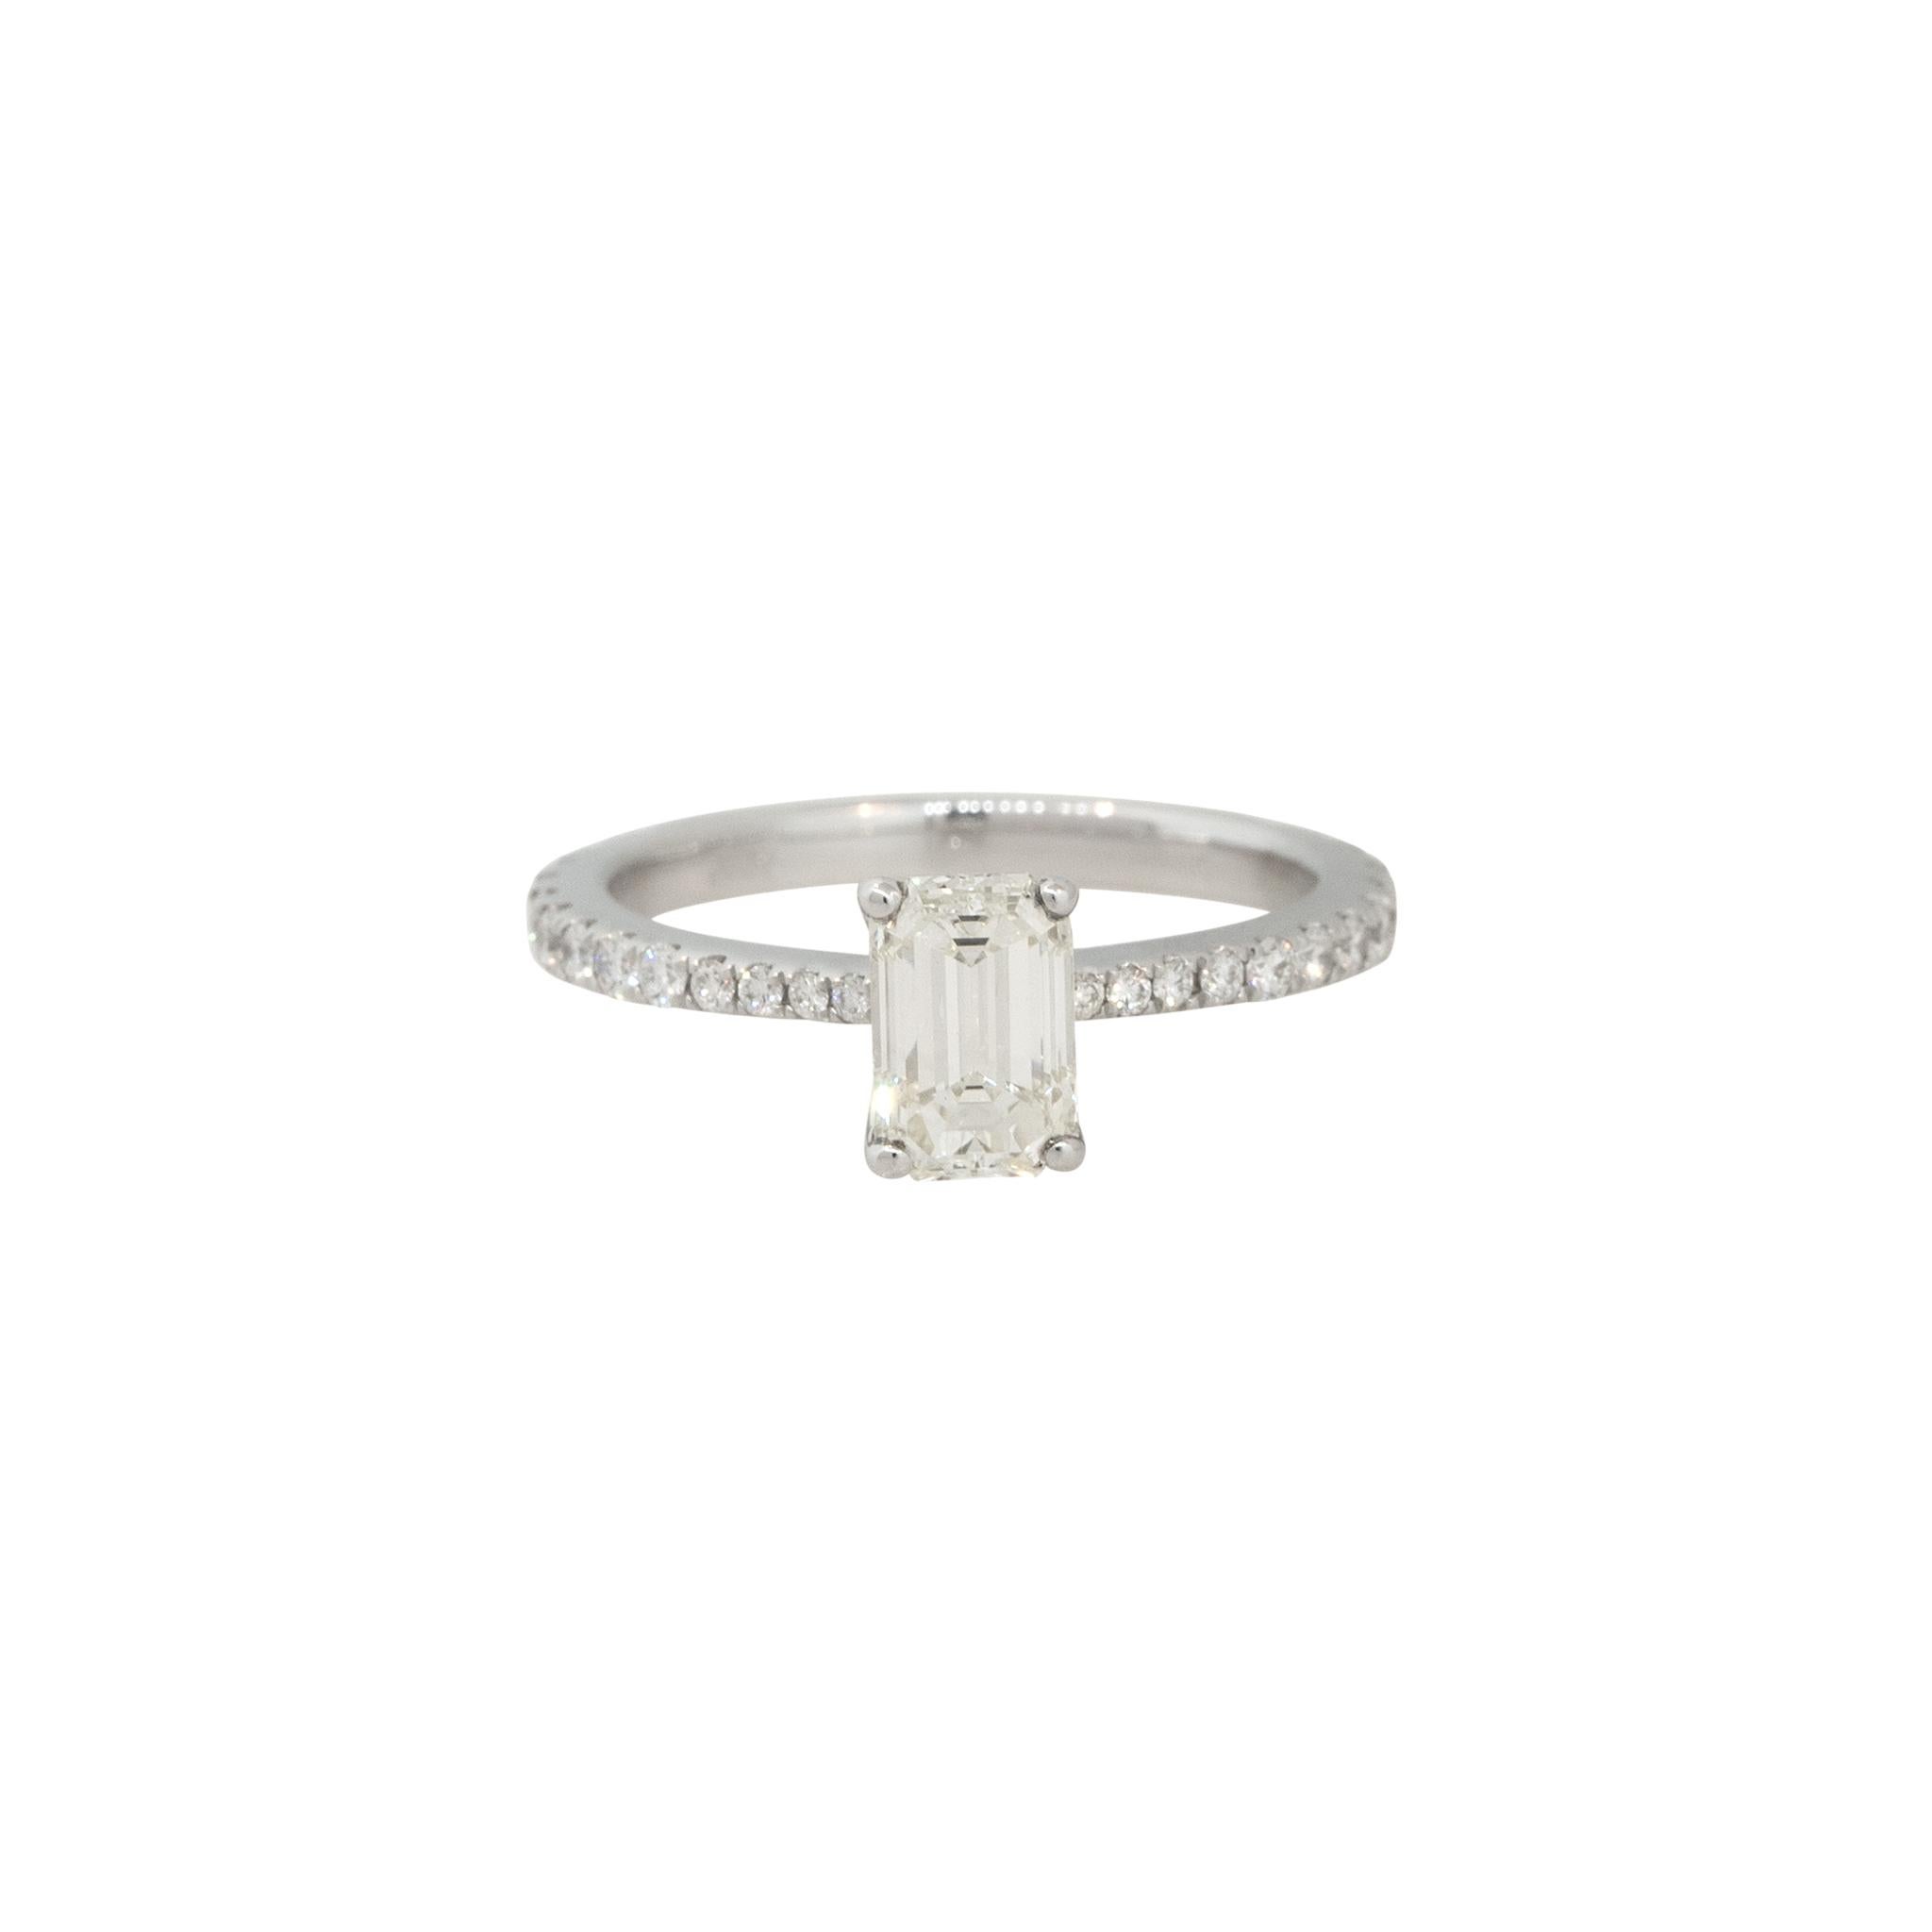 GIA Certified 18k White Gold 1.21ctw Emerald Cut Diamond Engagement Ring

Raymond Lee Jewelers in Boca Raton -- South Florida’s destination for diamonds, fine jewelry, antique jewelry, estate pieces, and vintage jewels.

Style: Women's 4 Prong